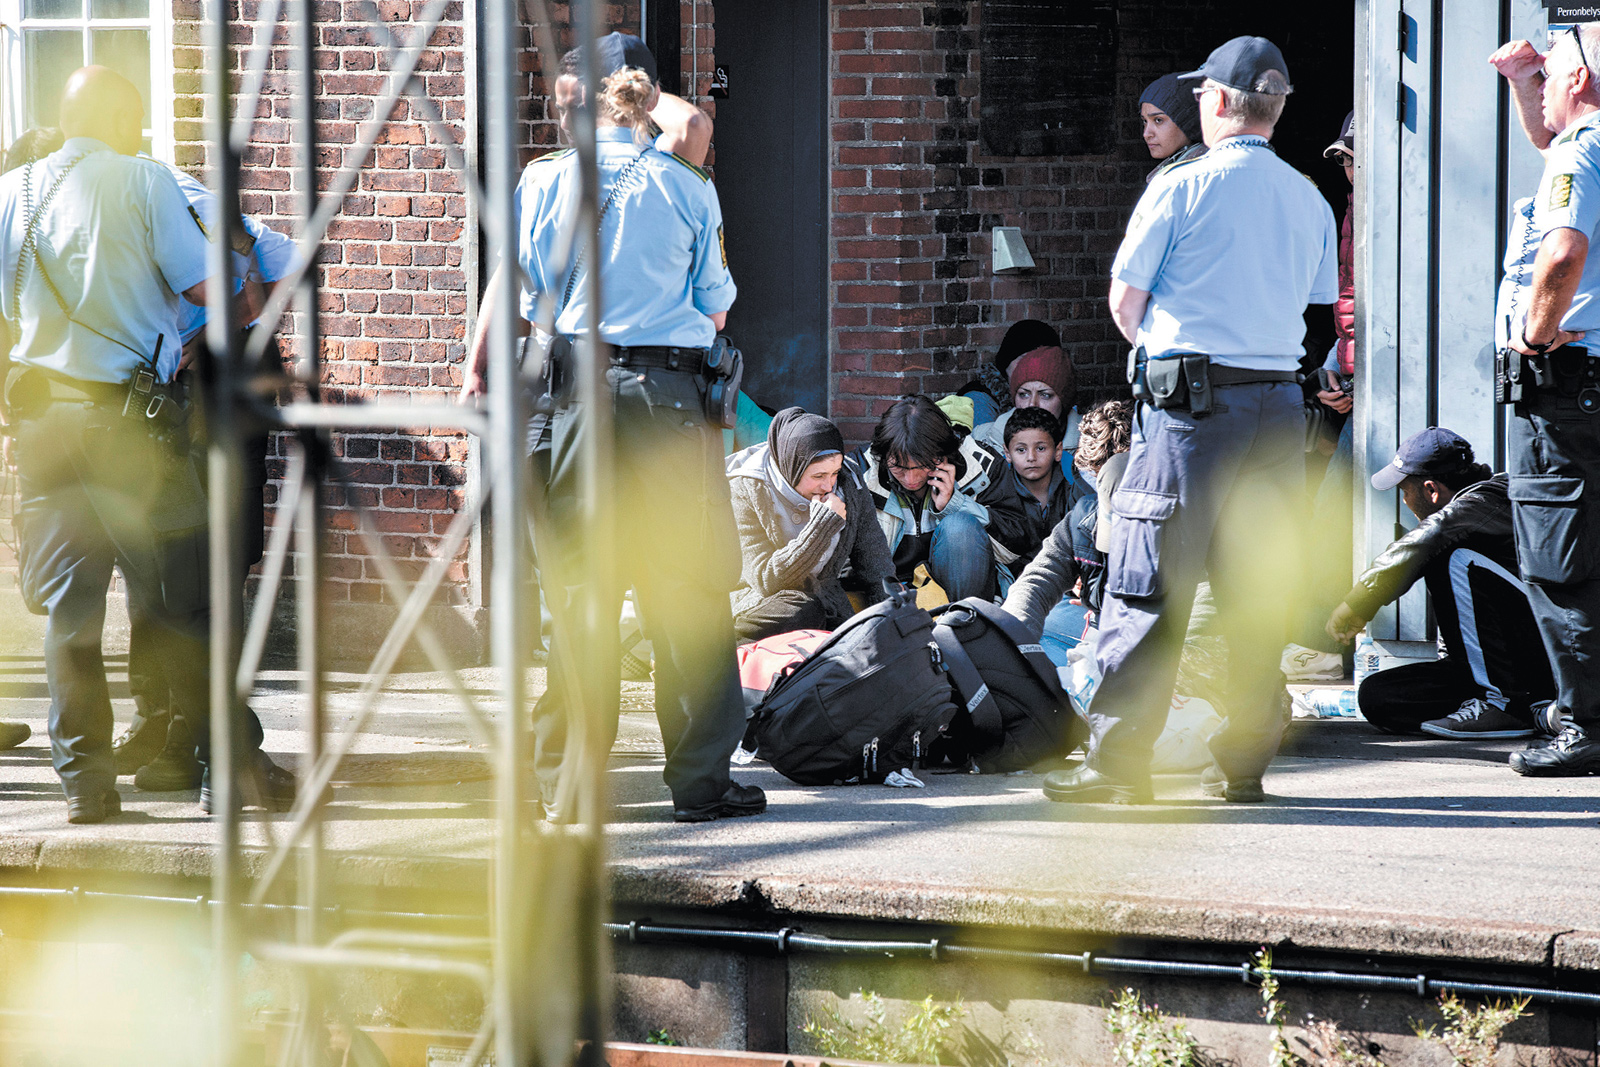 Police officers guarding refugees at Padborg Station, Denmark, after they entered the country from Germany, September 2015